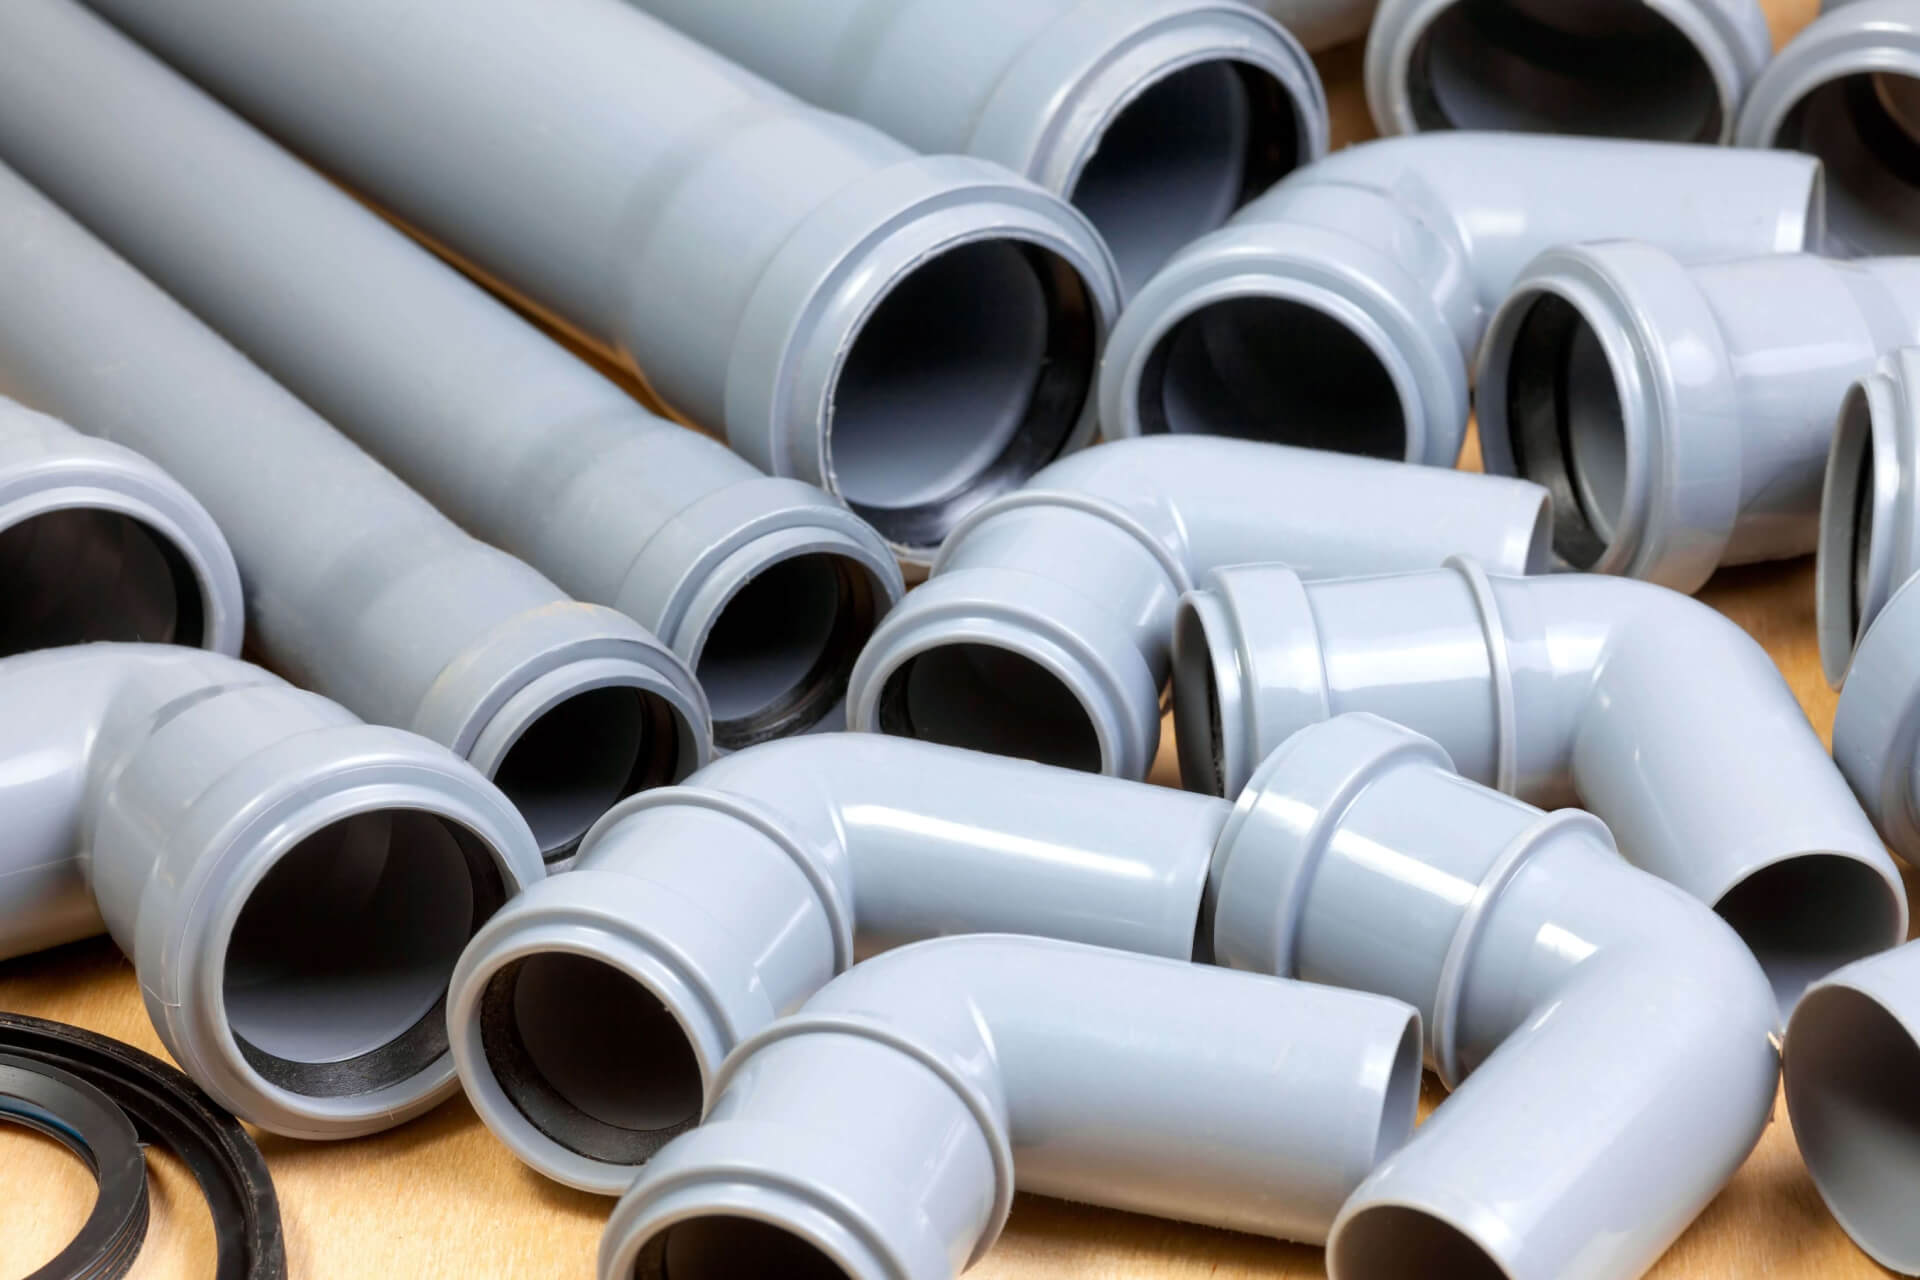 Sewer pipe & Fittings